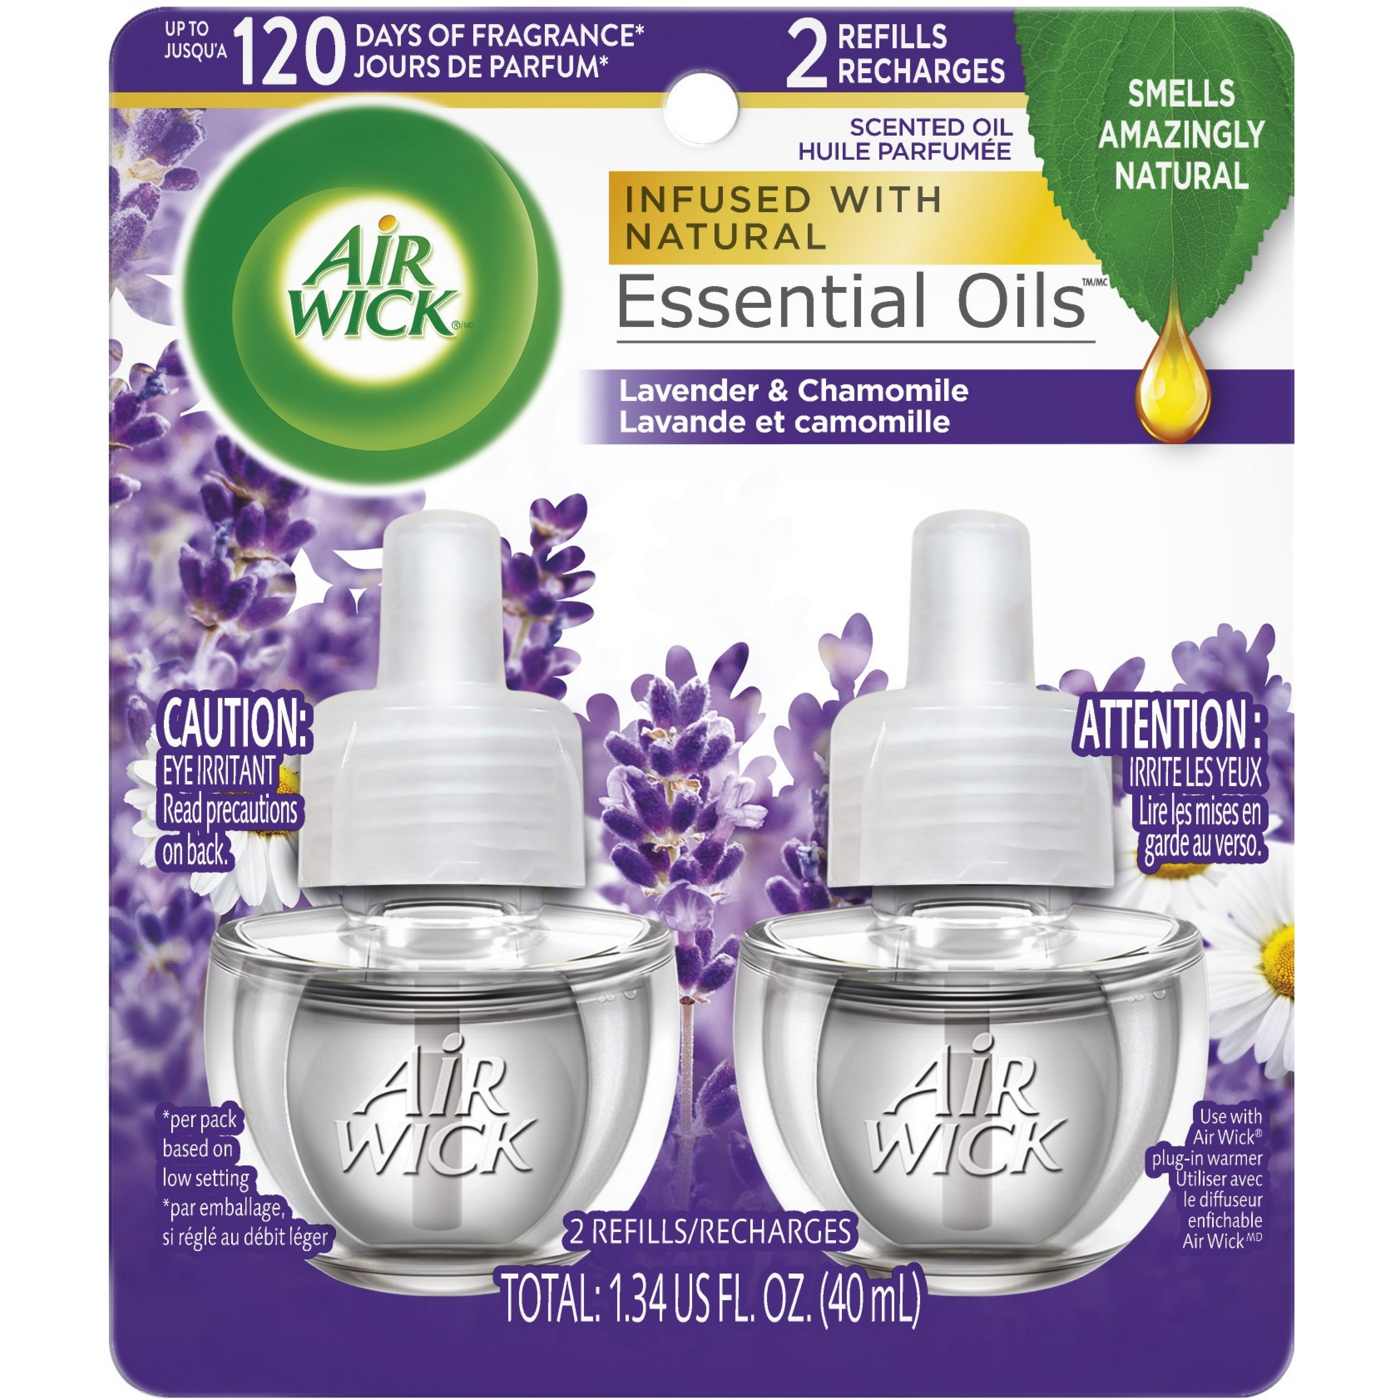 Air Wick Scented Oil Refills - Lavender & Chamomile; image 1 of 8